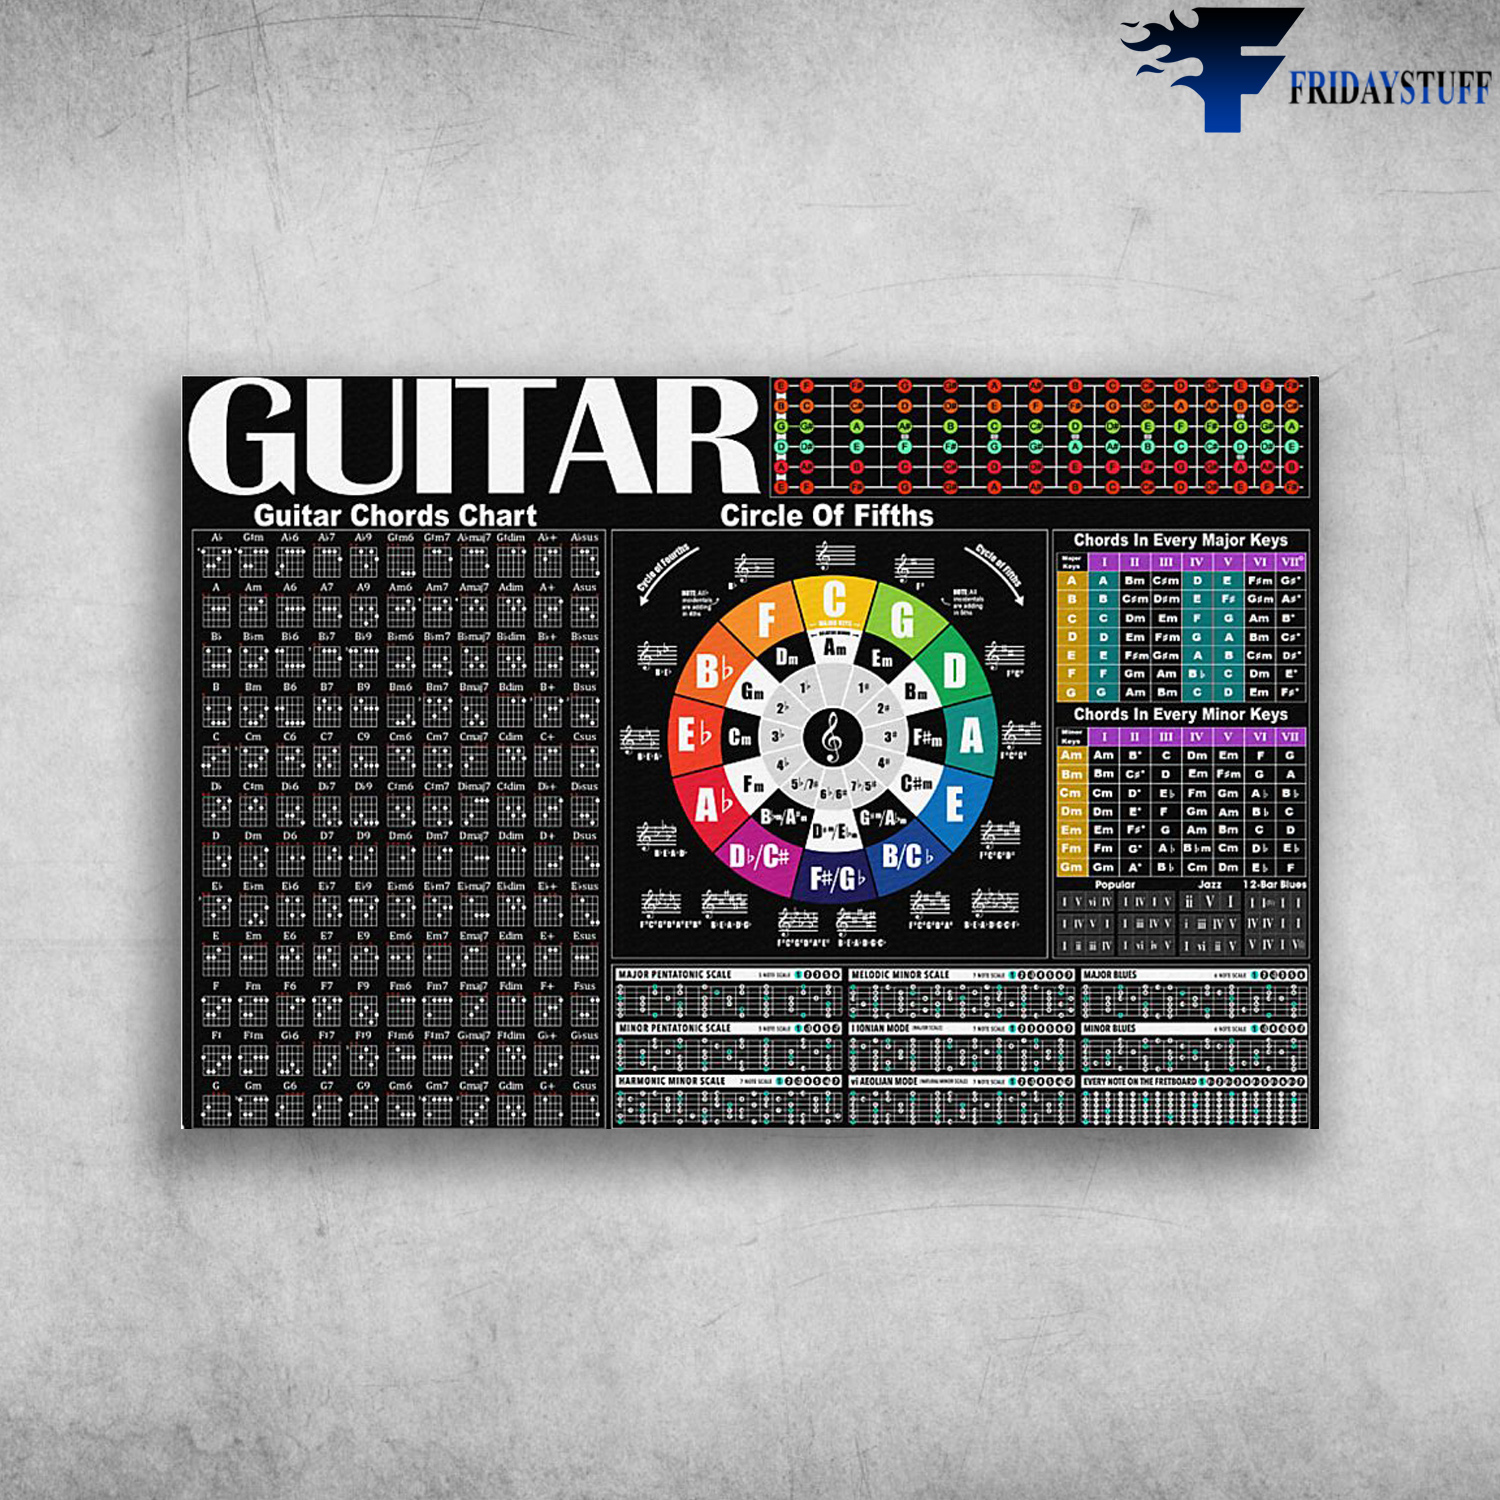 Knowledge About Guitar - Guitar Chords Chart, Circle Of Fifths, Chords In Every Major Keys, Chords In Every Minor Keys